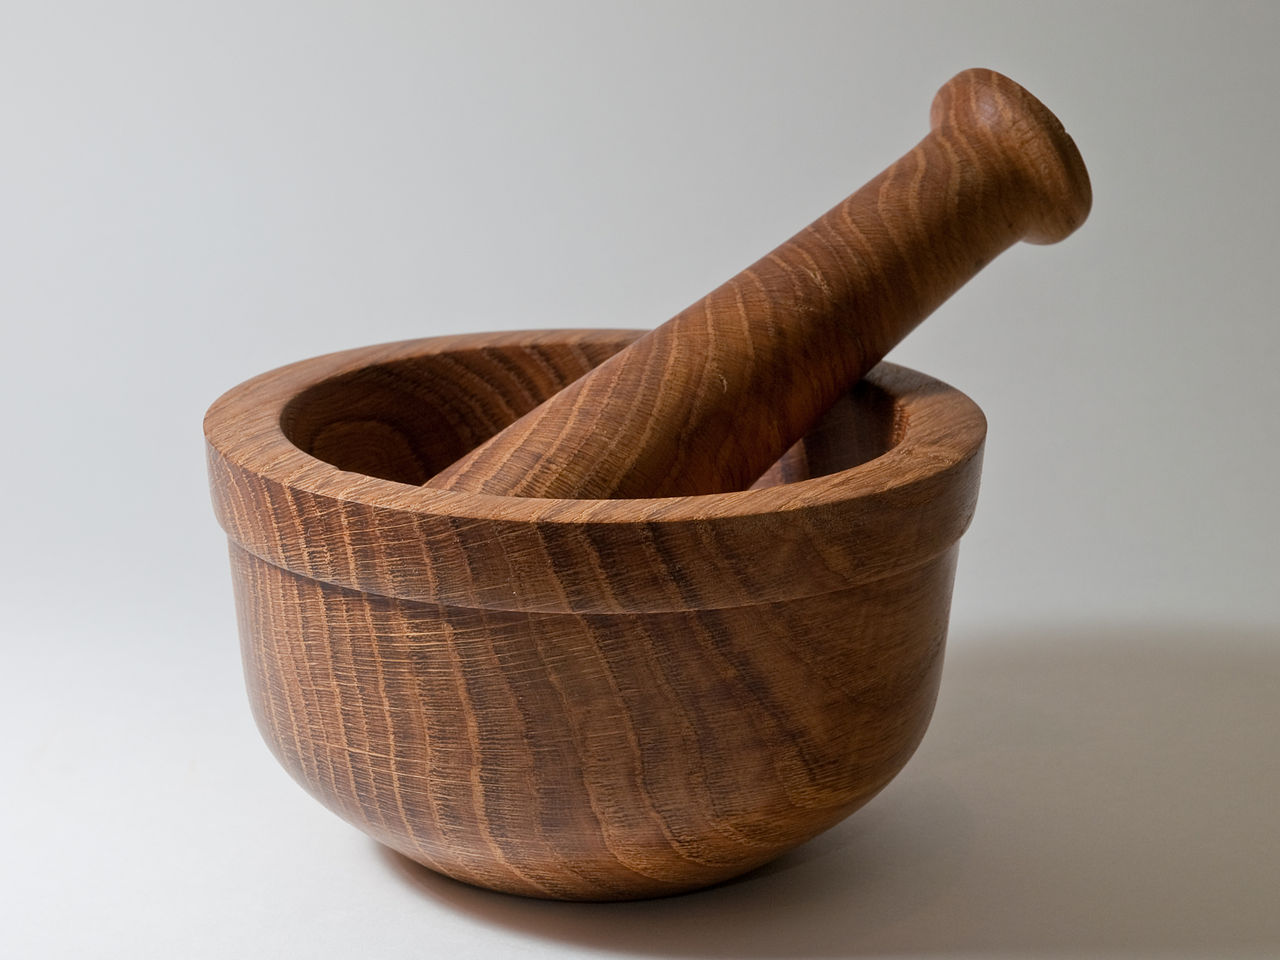 14 Uses of The Mortar and Pestle Around The World - Things Guyana